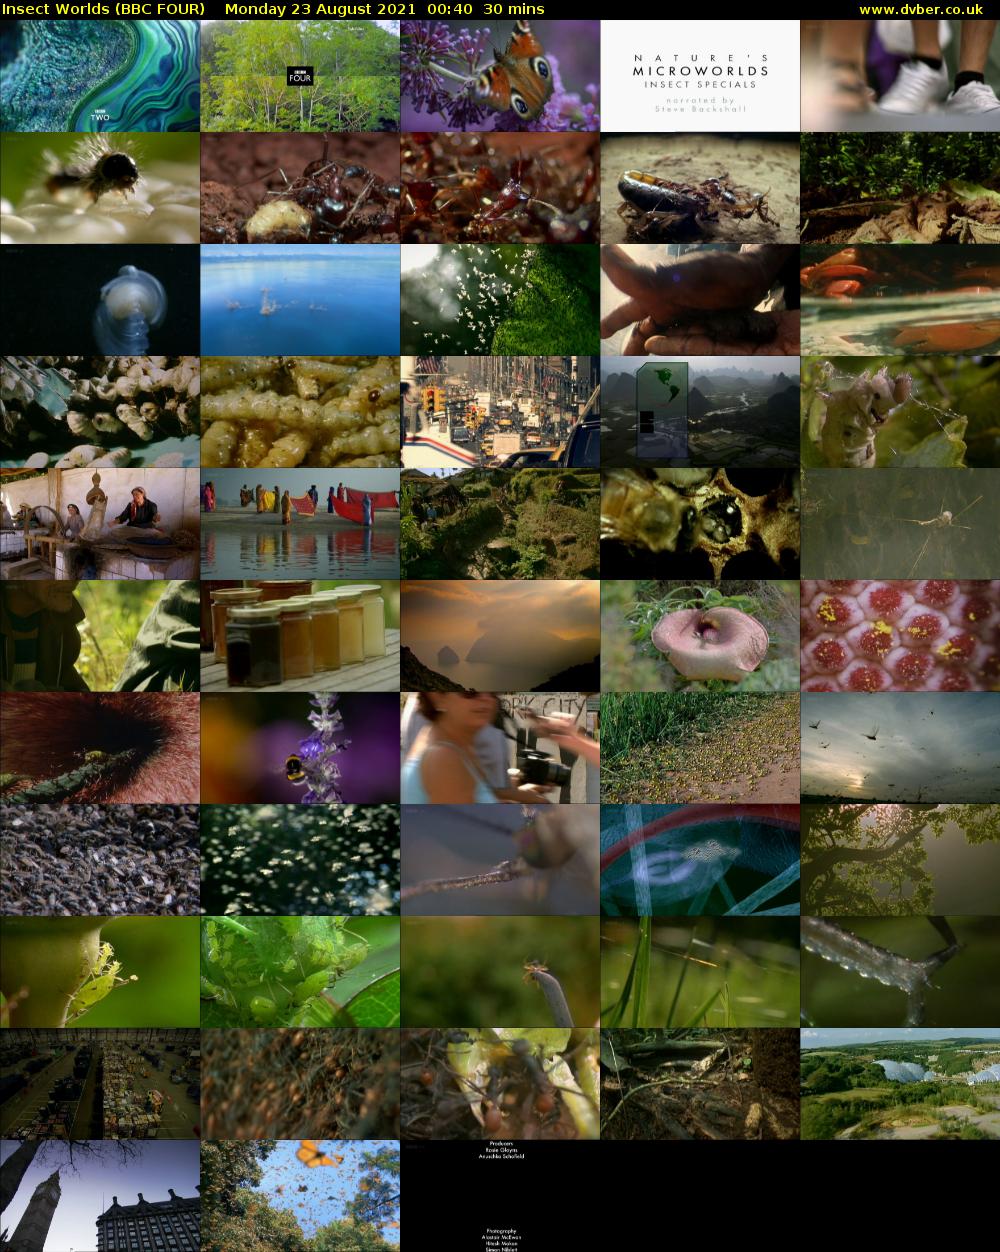 Insect Worlds (BBC FOUR) Monday 23 August 2021 00:40 - 01:10